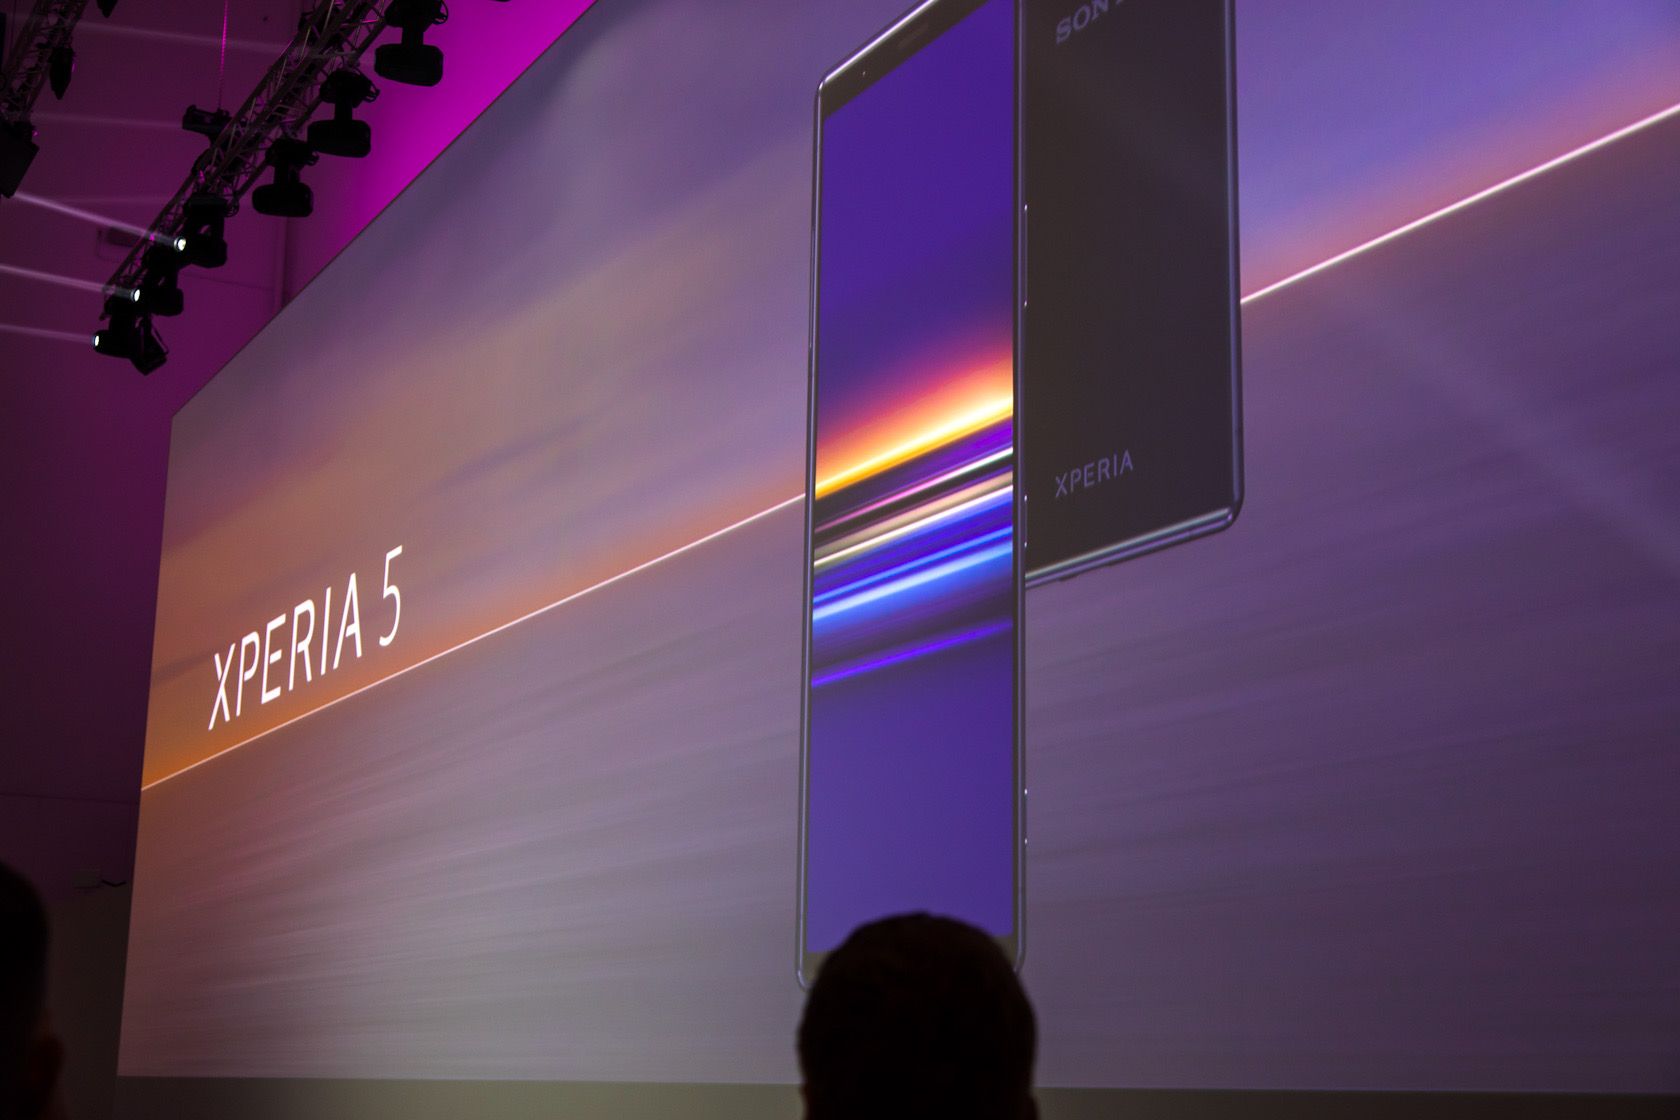 Sony Xperia 5 launch event